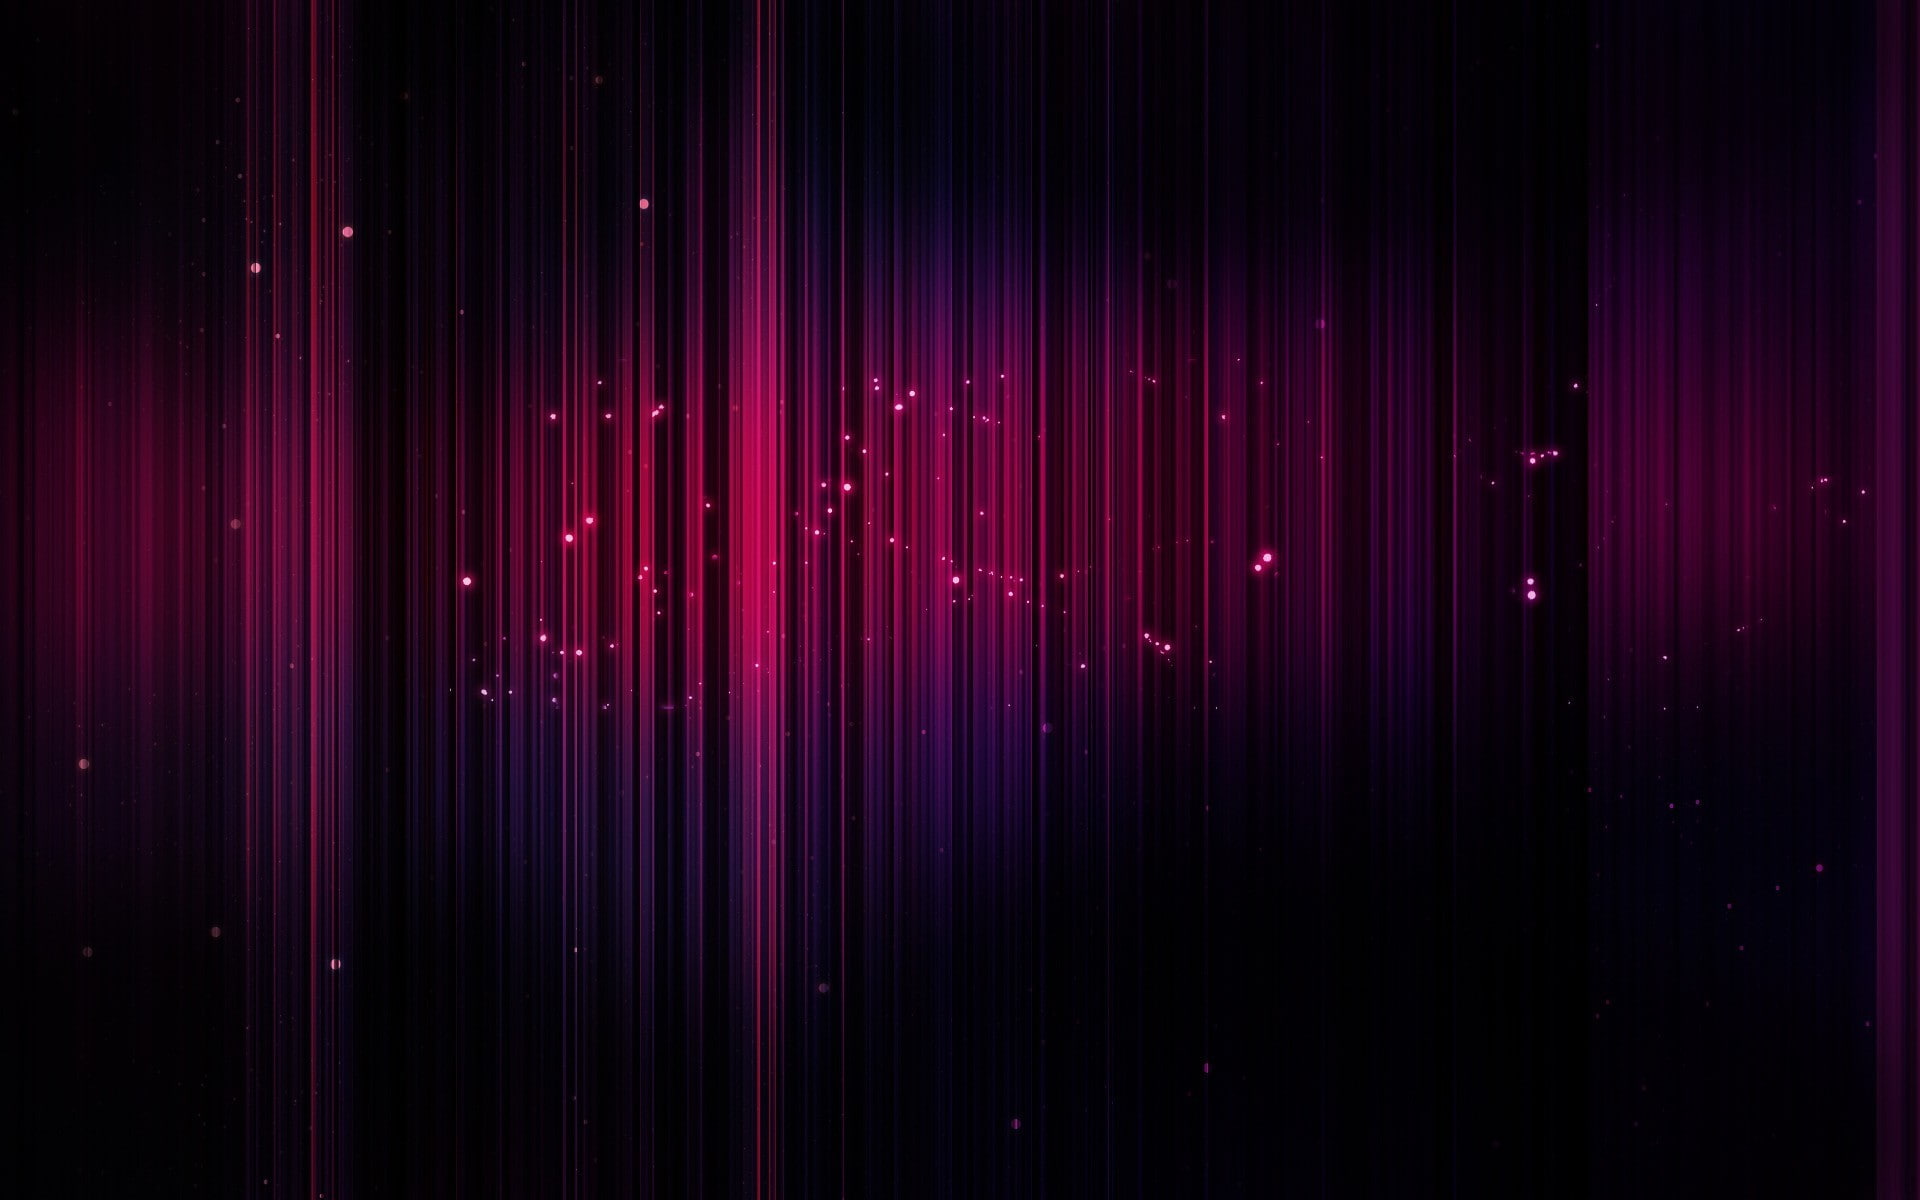 abstract, lines, digital art, backgrounds, pattern, red, night